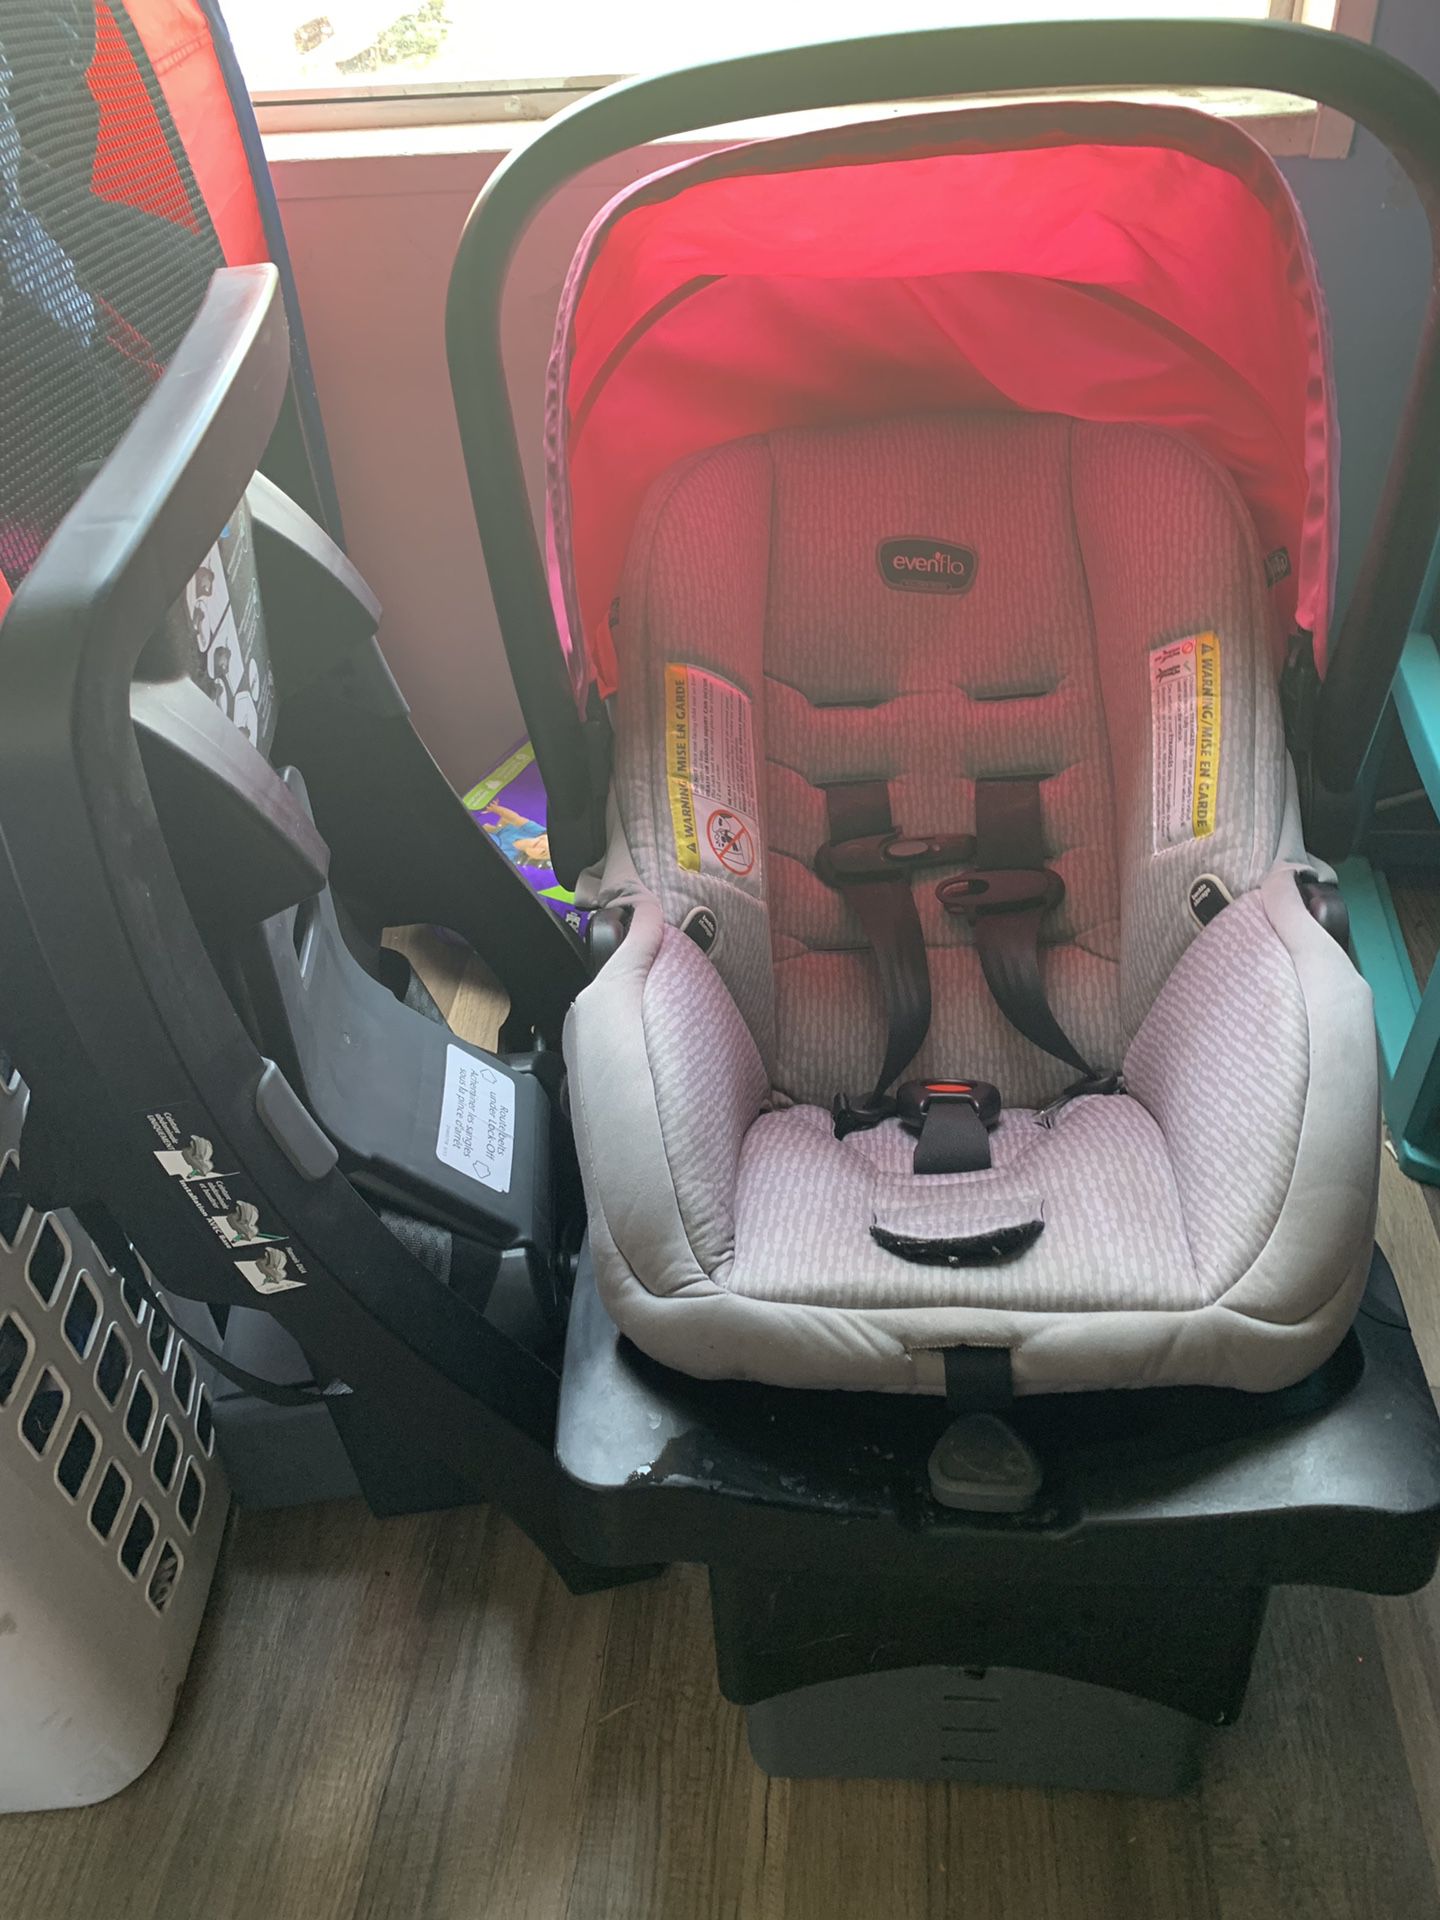 Even flo car seat with 2 bases